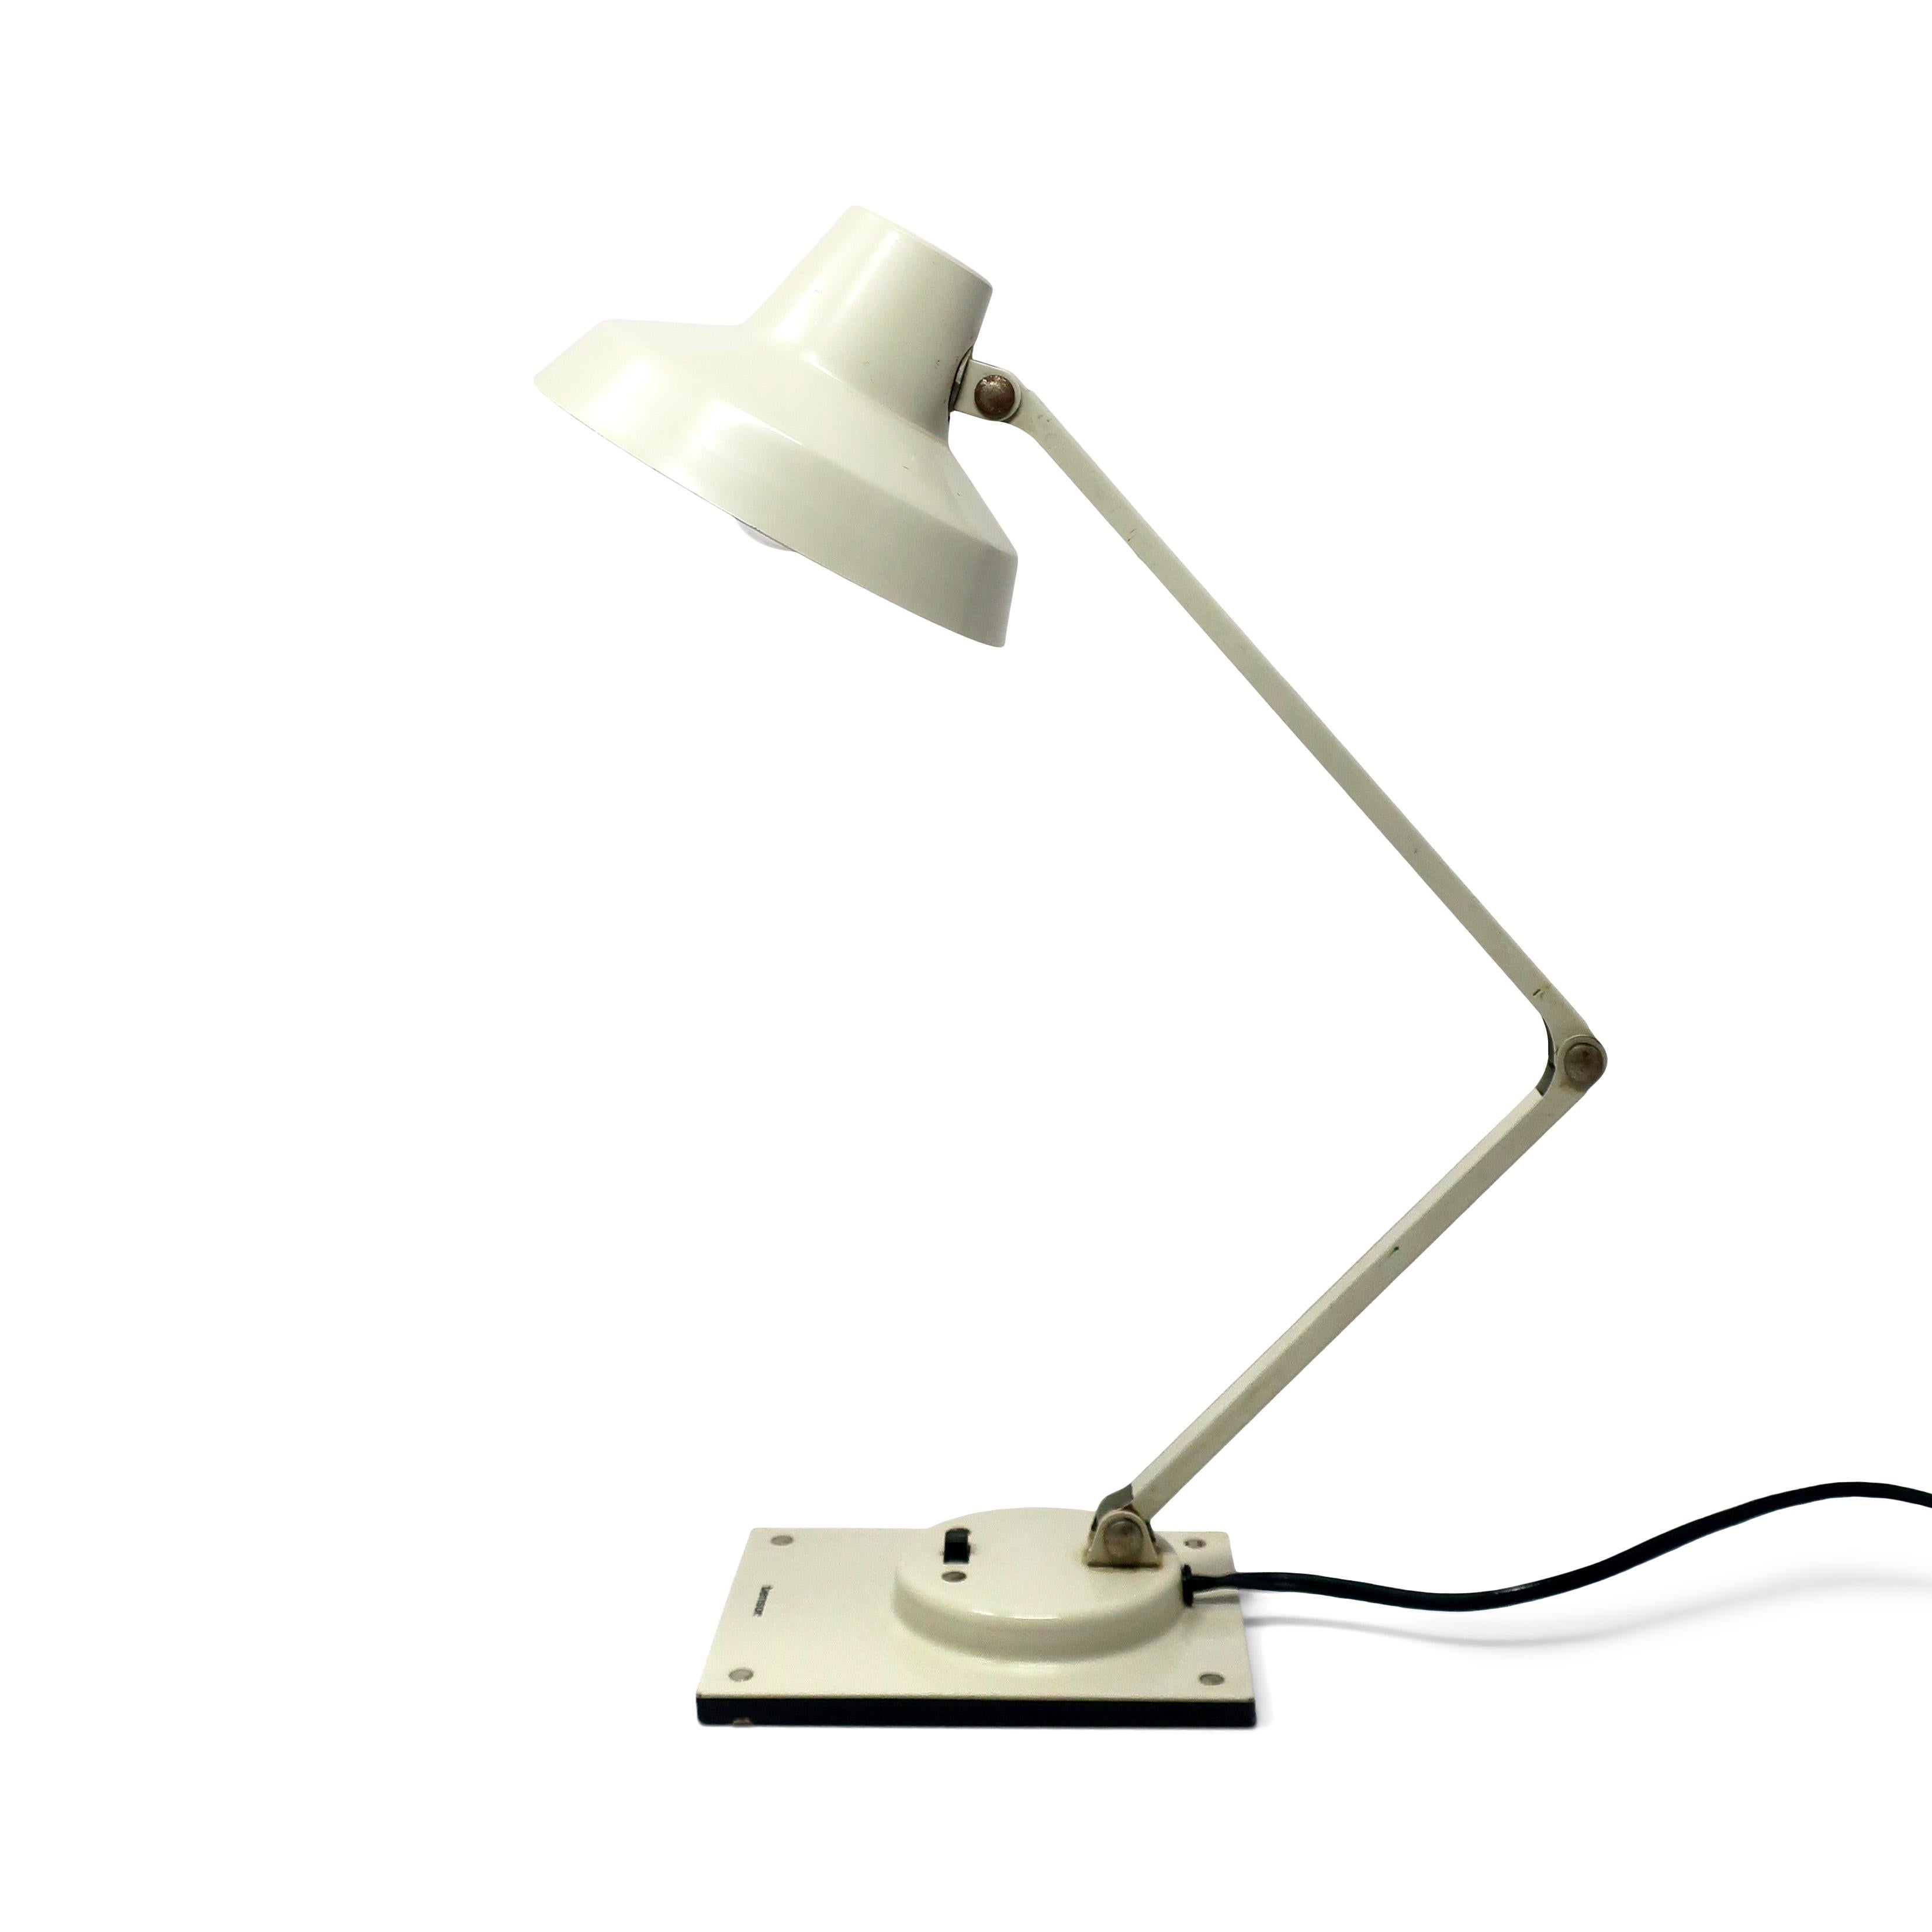 A perfect mid-century modern Tensor IL 400 articulating desk lamp.  White textured base and shade, white stem, and switch on the base.  In good vintage condition.

4